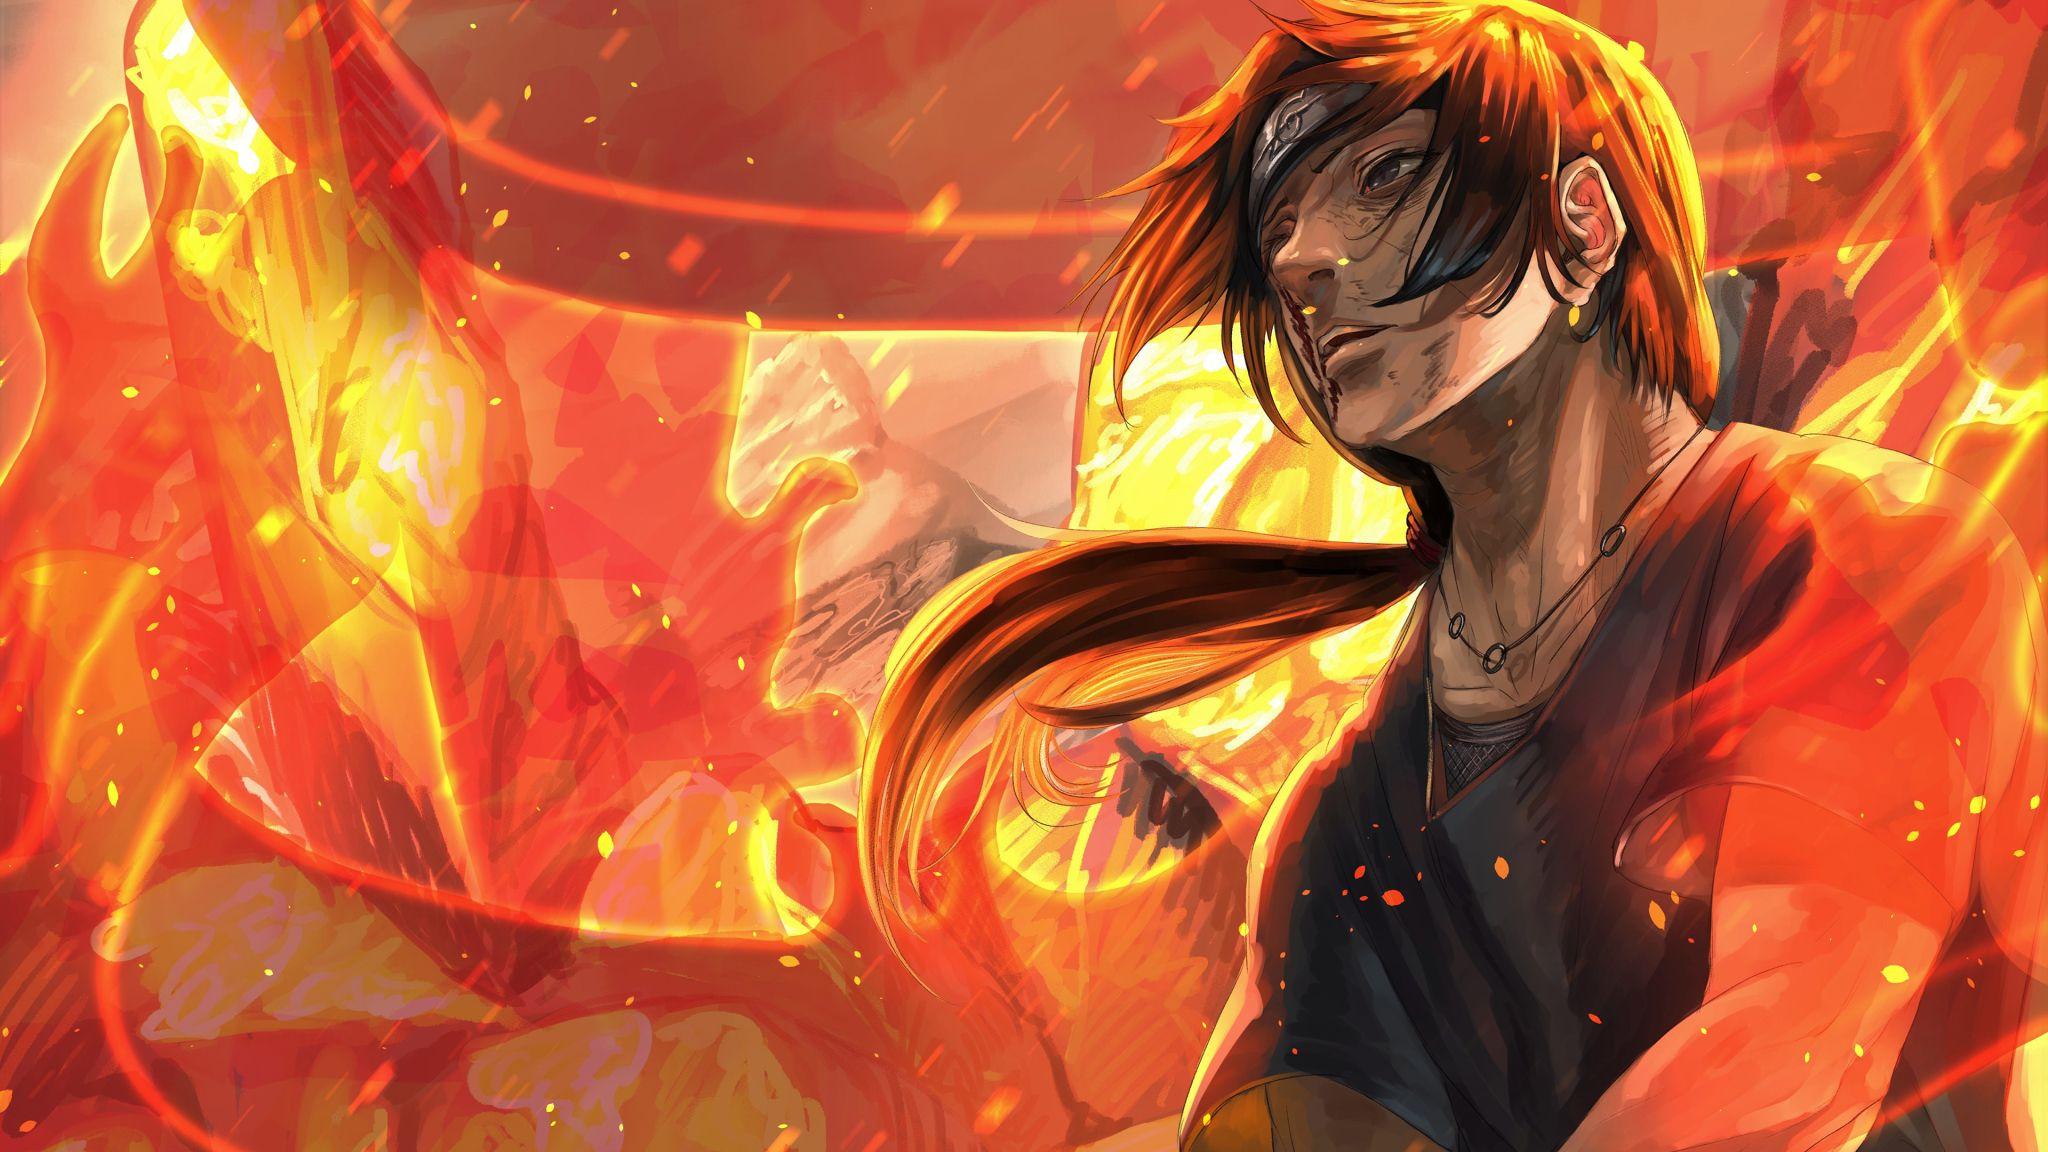 Anime Fire Background Images, HD Pictures and Wallpaper For Free Download |  Pngtree